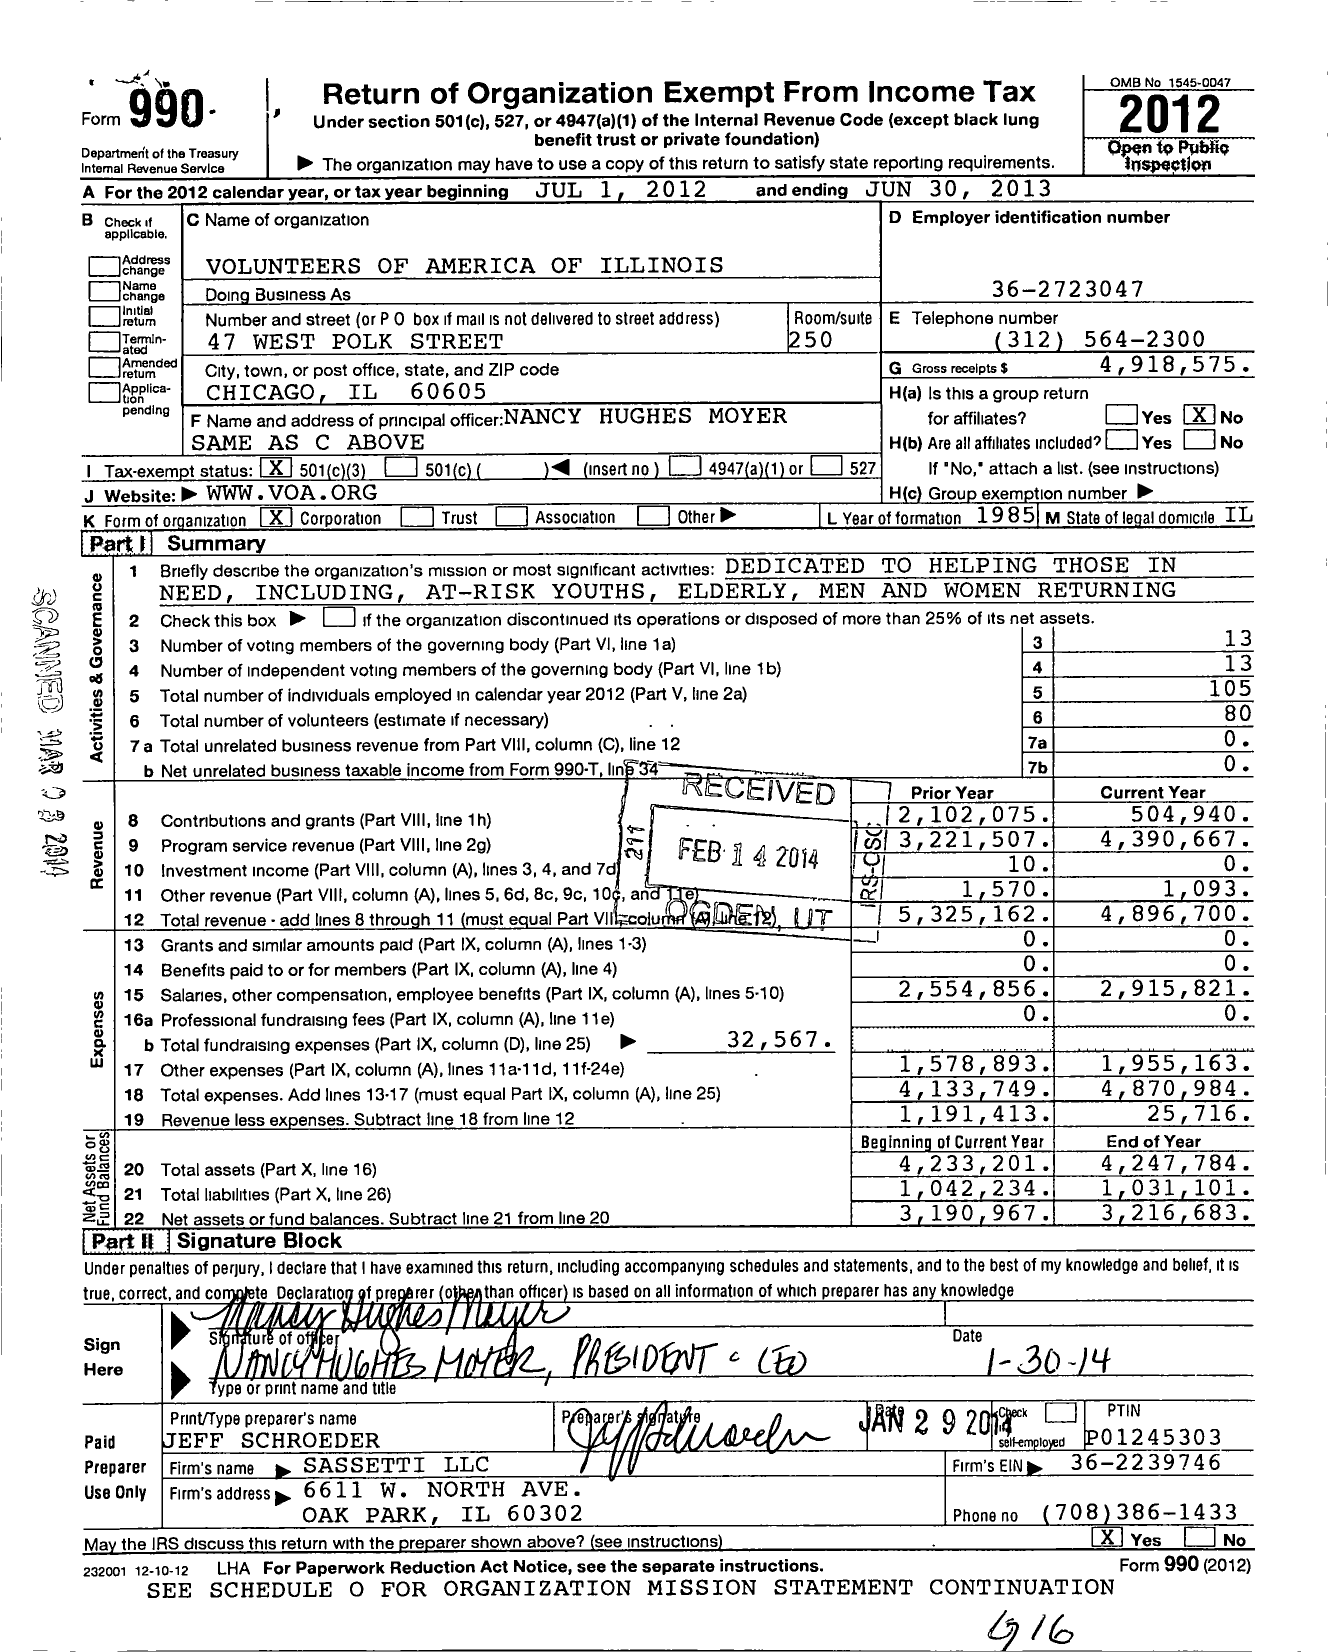 Image of first page of 2012 Form 990 for Volunteers of America of Illinois (VOA of IL)